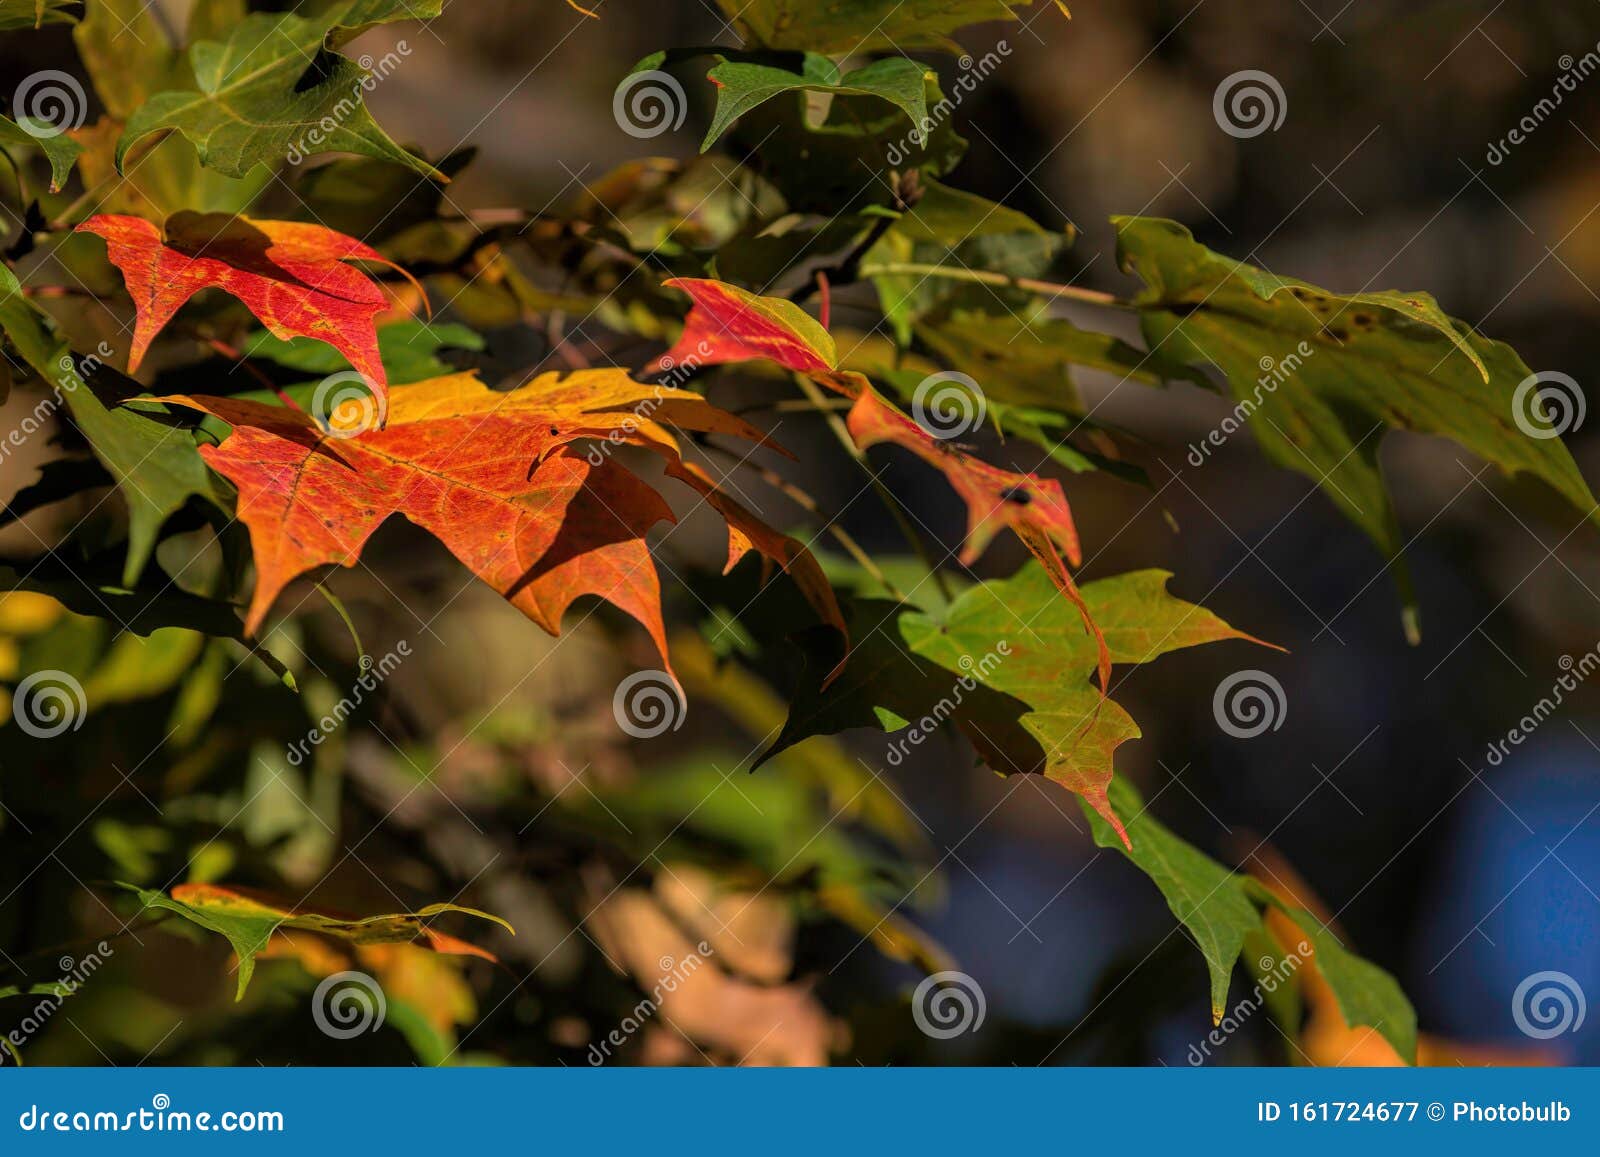 Maple Leaves Turn Color in the Fall in Upstate New York. Maple leaves kissed by the frost in upstate New York.